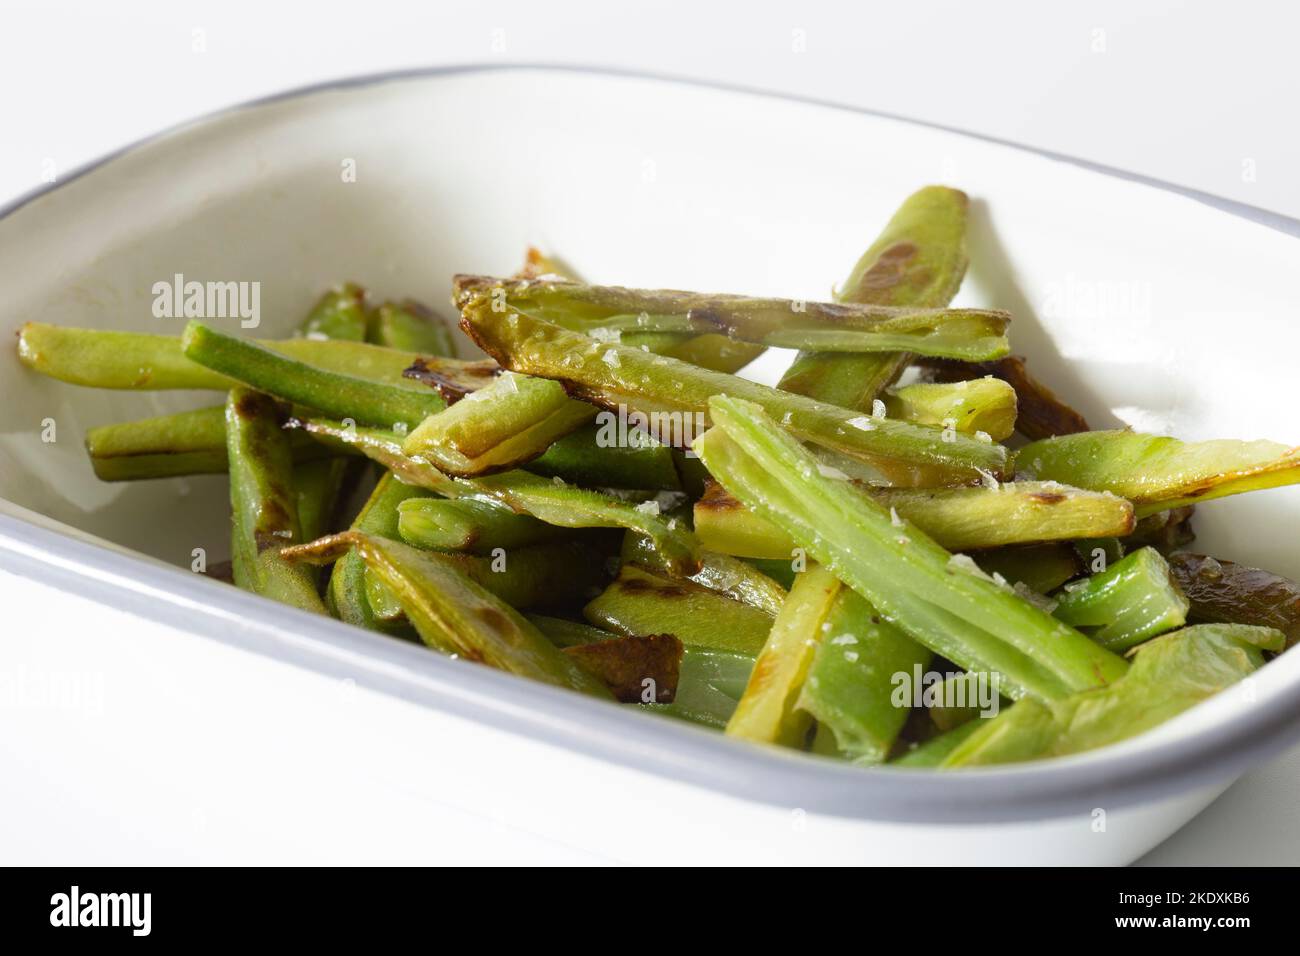 Green beans, fried in olive oil and seasoned with sea salt, in an enamel dish bowl Stock Photo